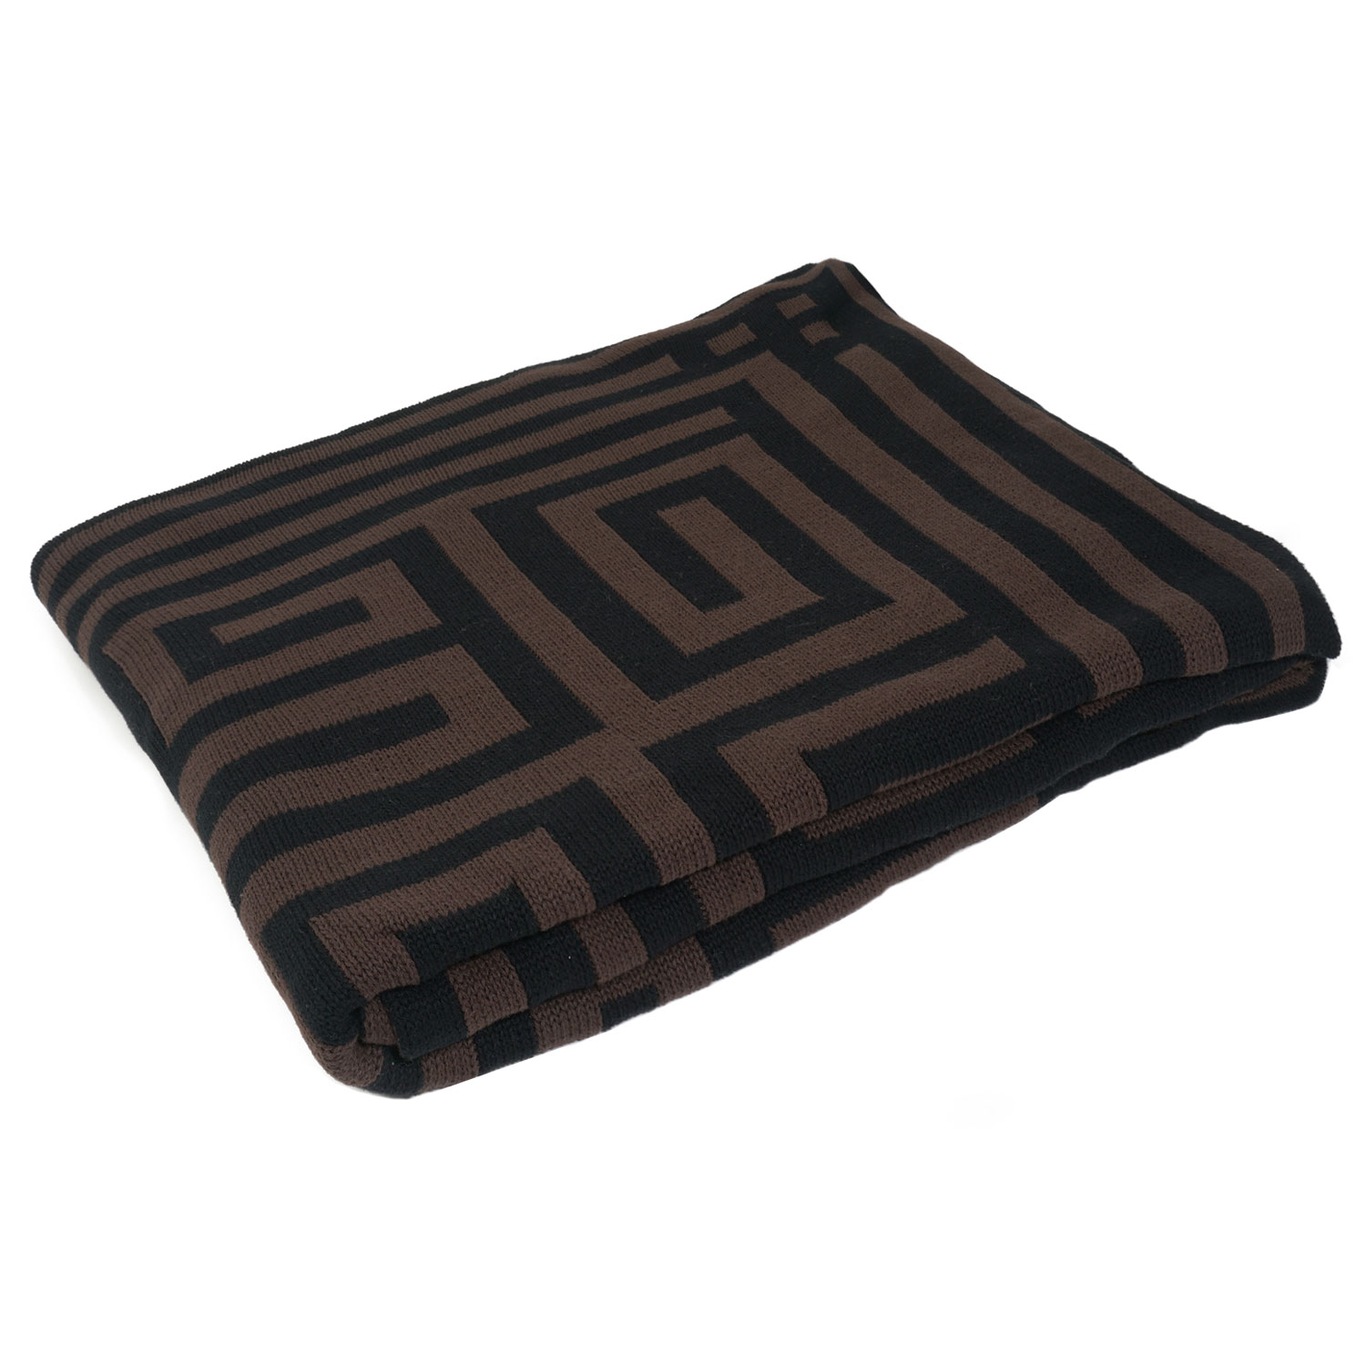 Knitted Throw 130x160 cm, Brown/Black